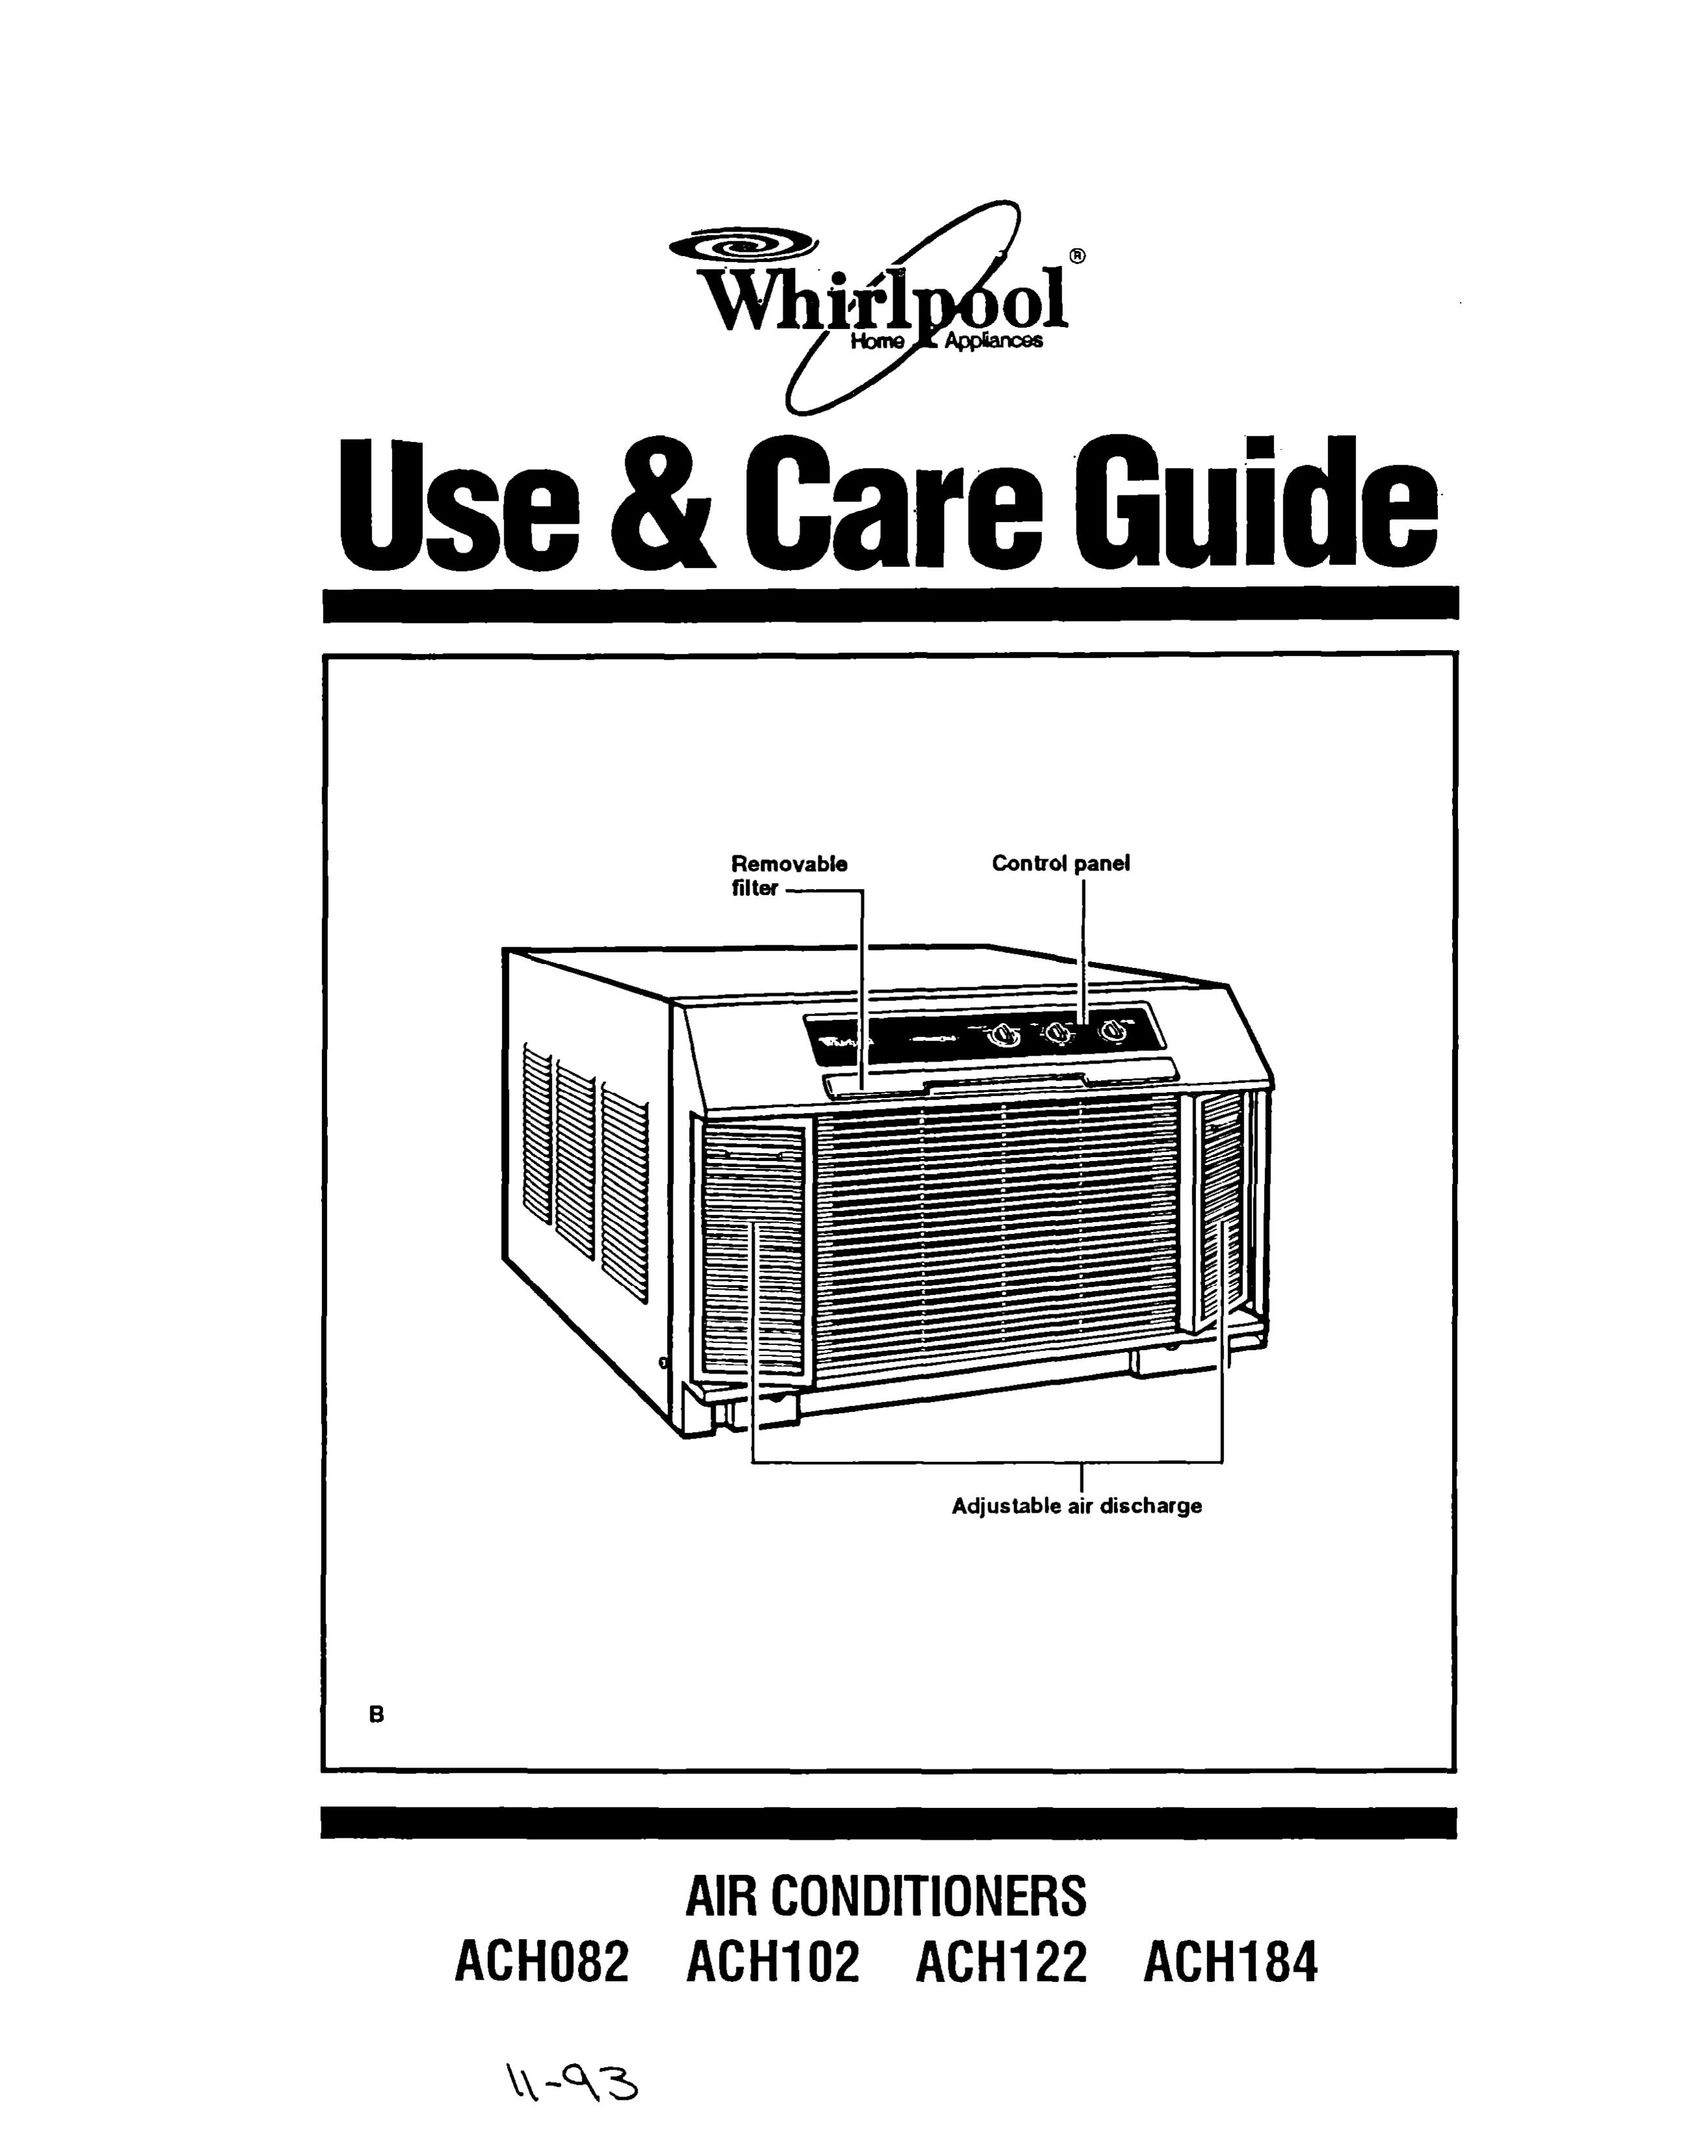 Whirlpool ACH102 Air Conditioner User Manual